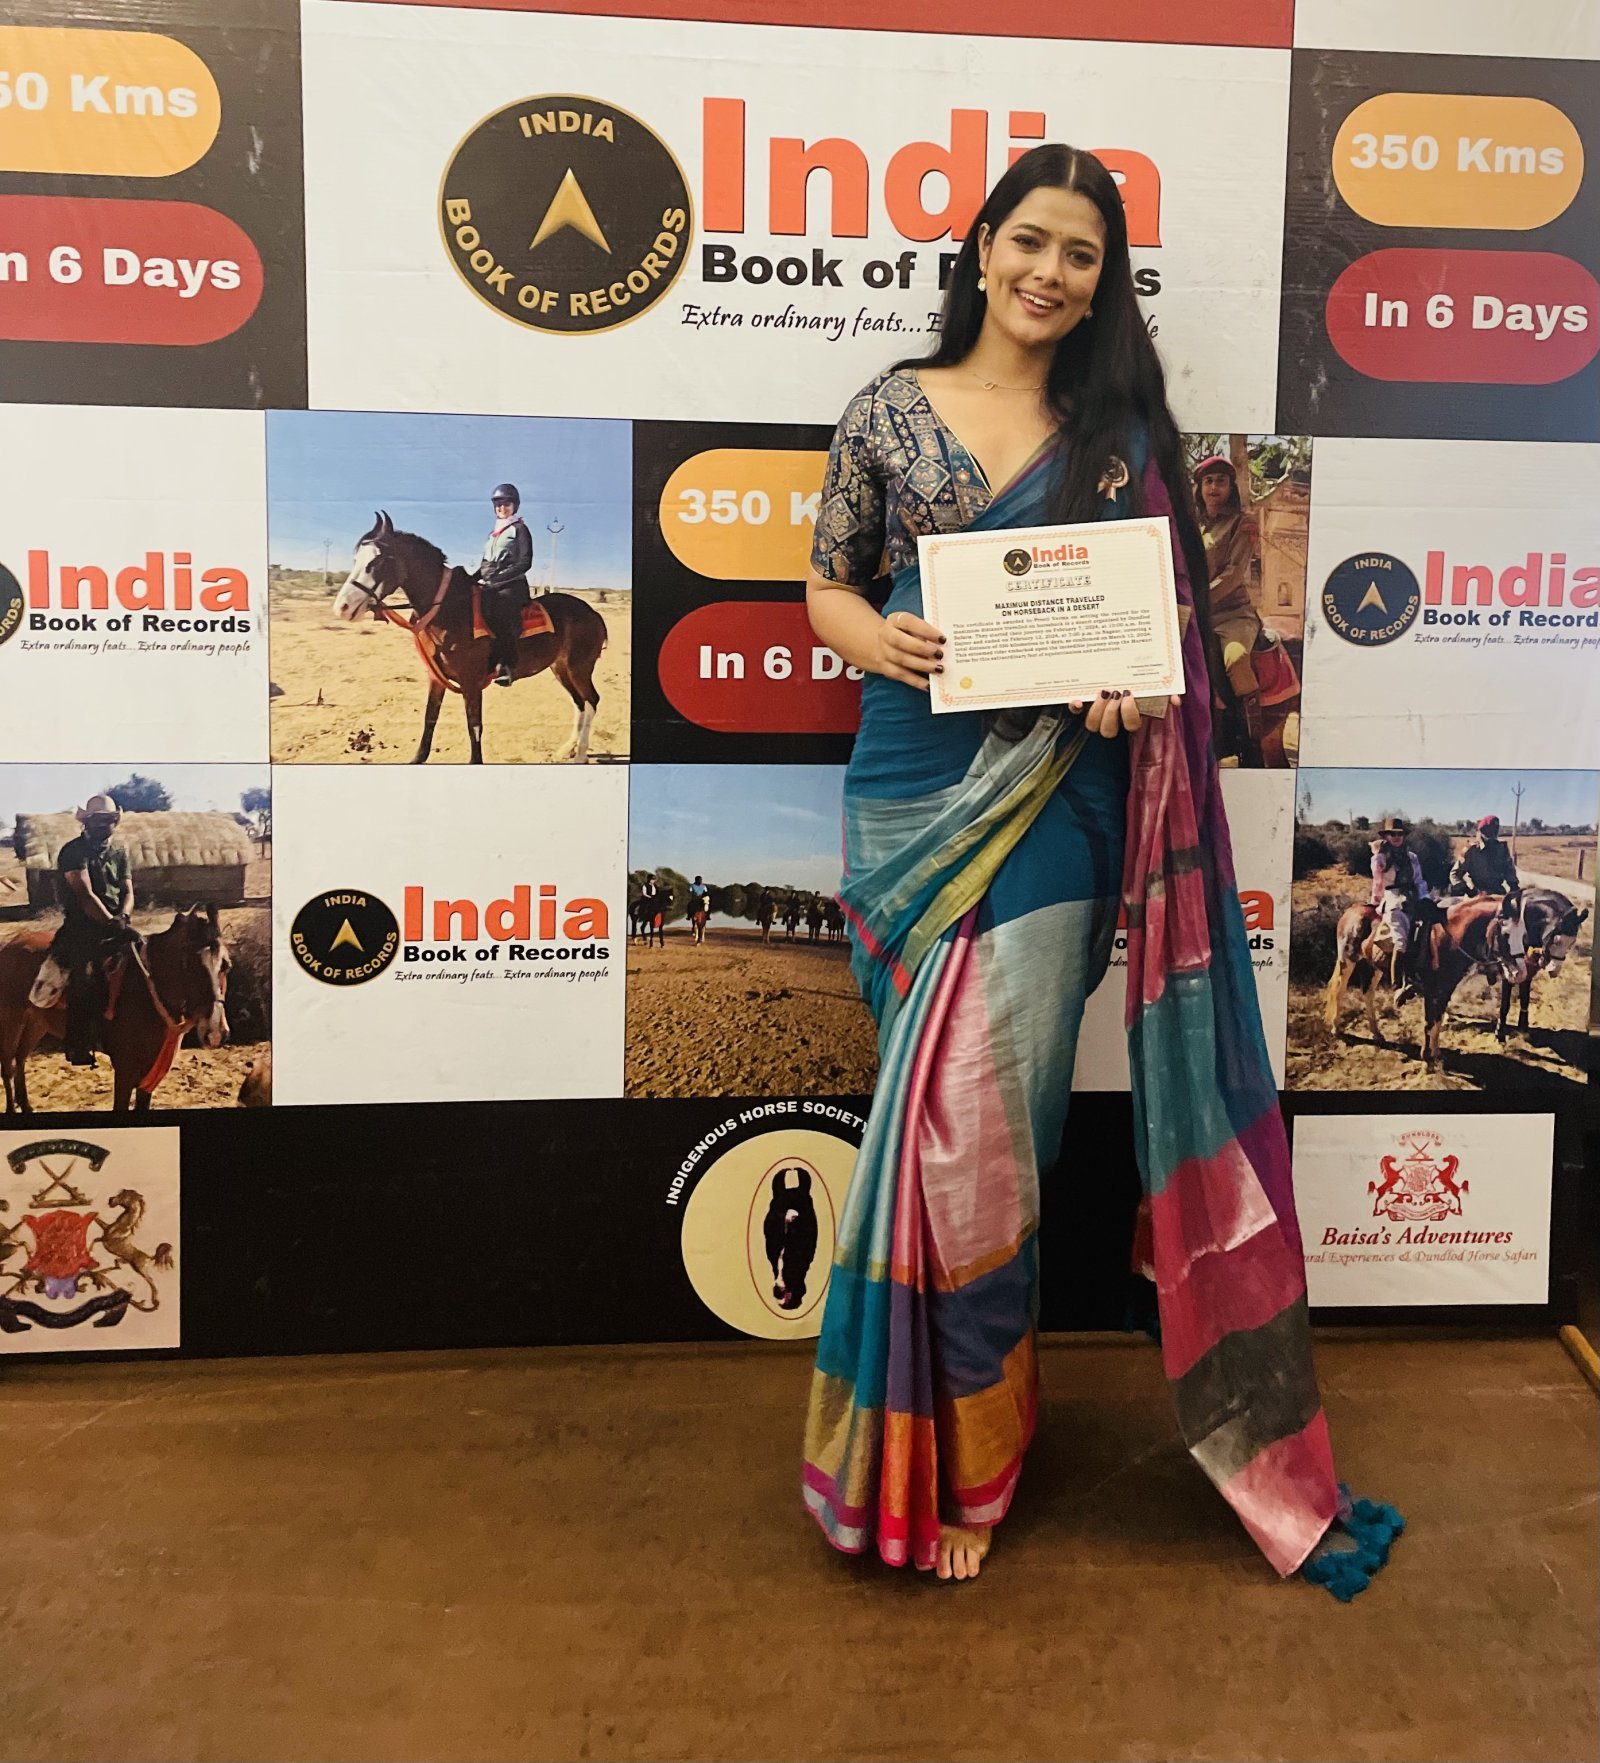 Bollywood Actress & Equestrian, Preeti Verma, Recognized by India Book of Records for Exceptional Achievement in Thar Desert Riding